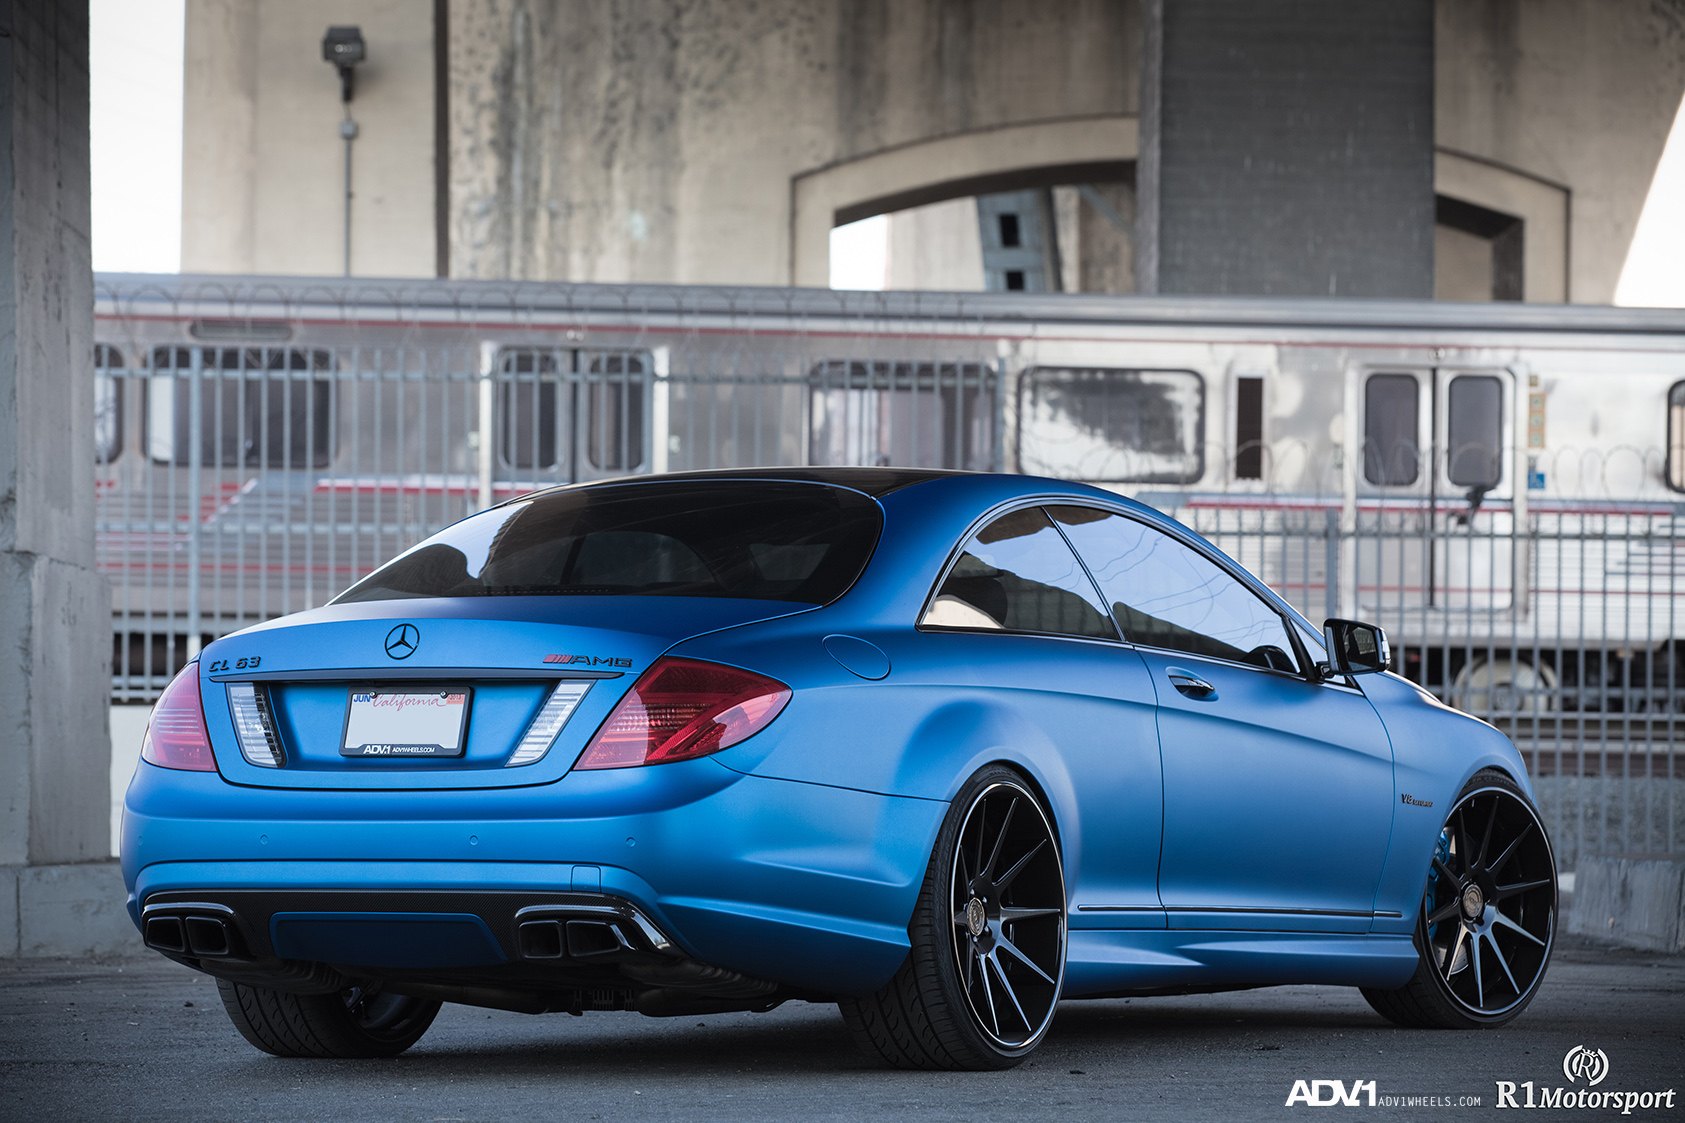 Black and Blue Mercedes CL63 AMG - Photo by ADV.1